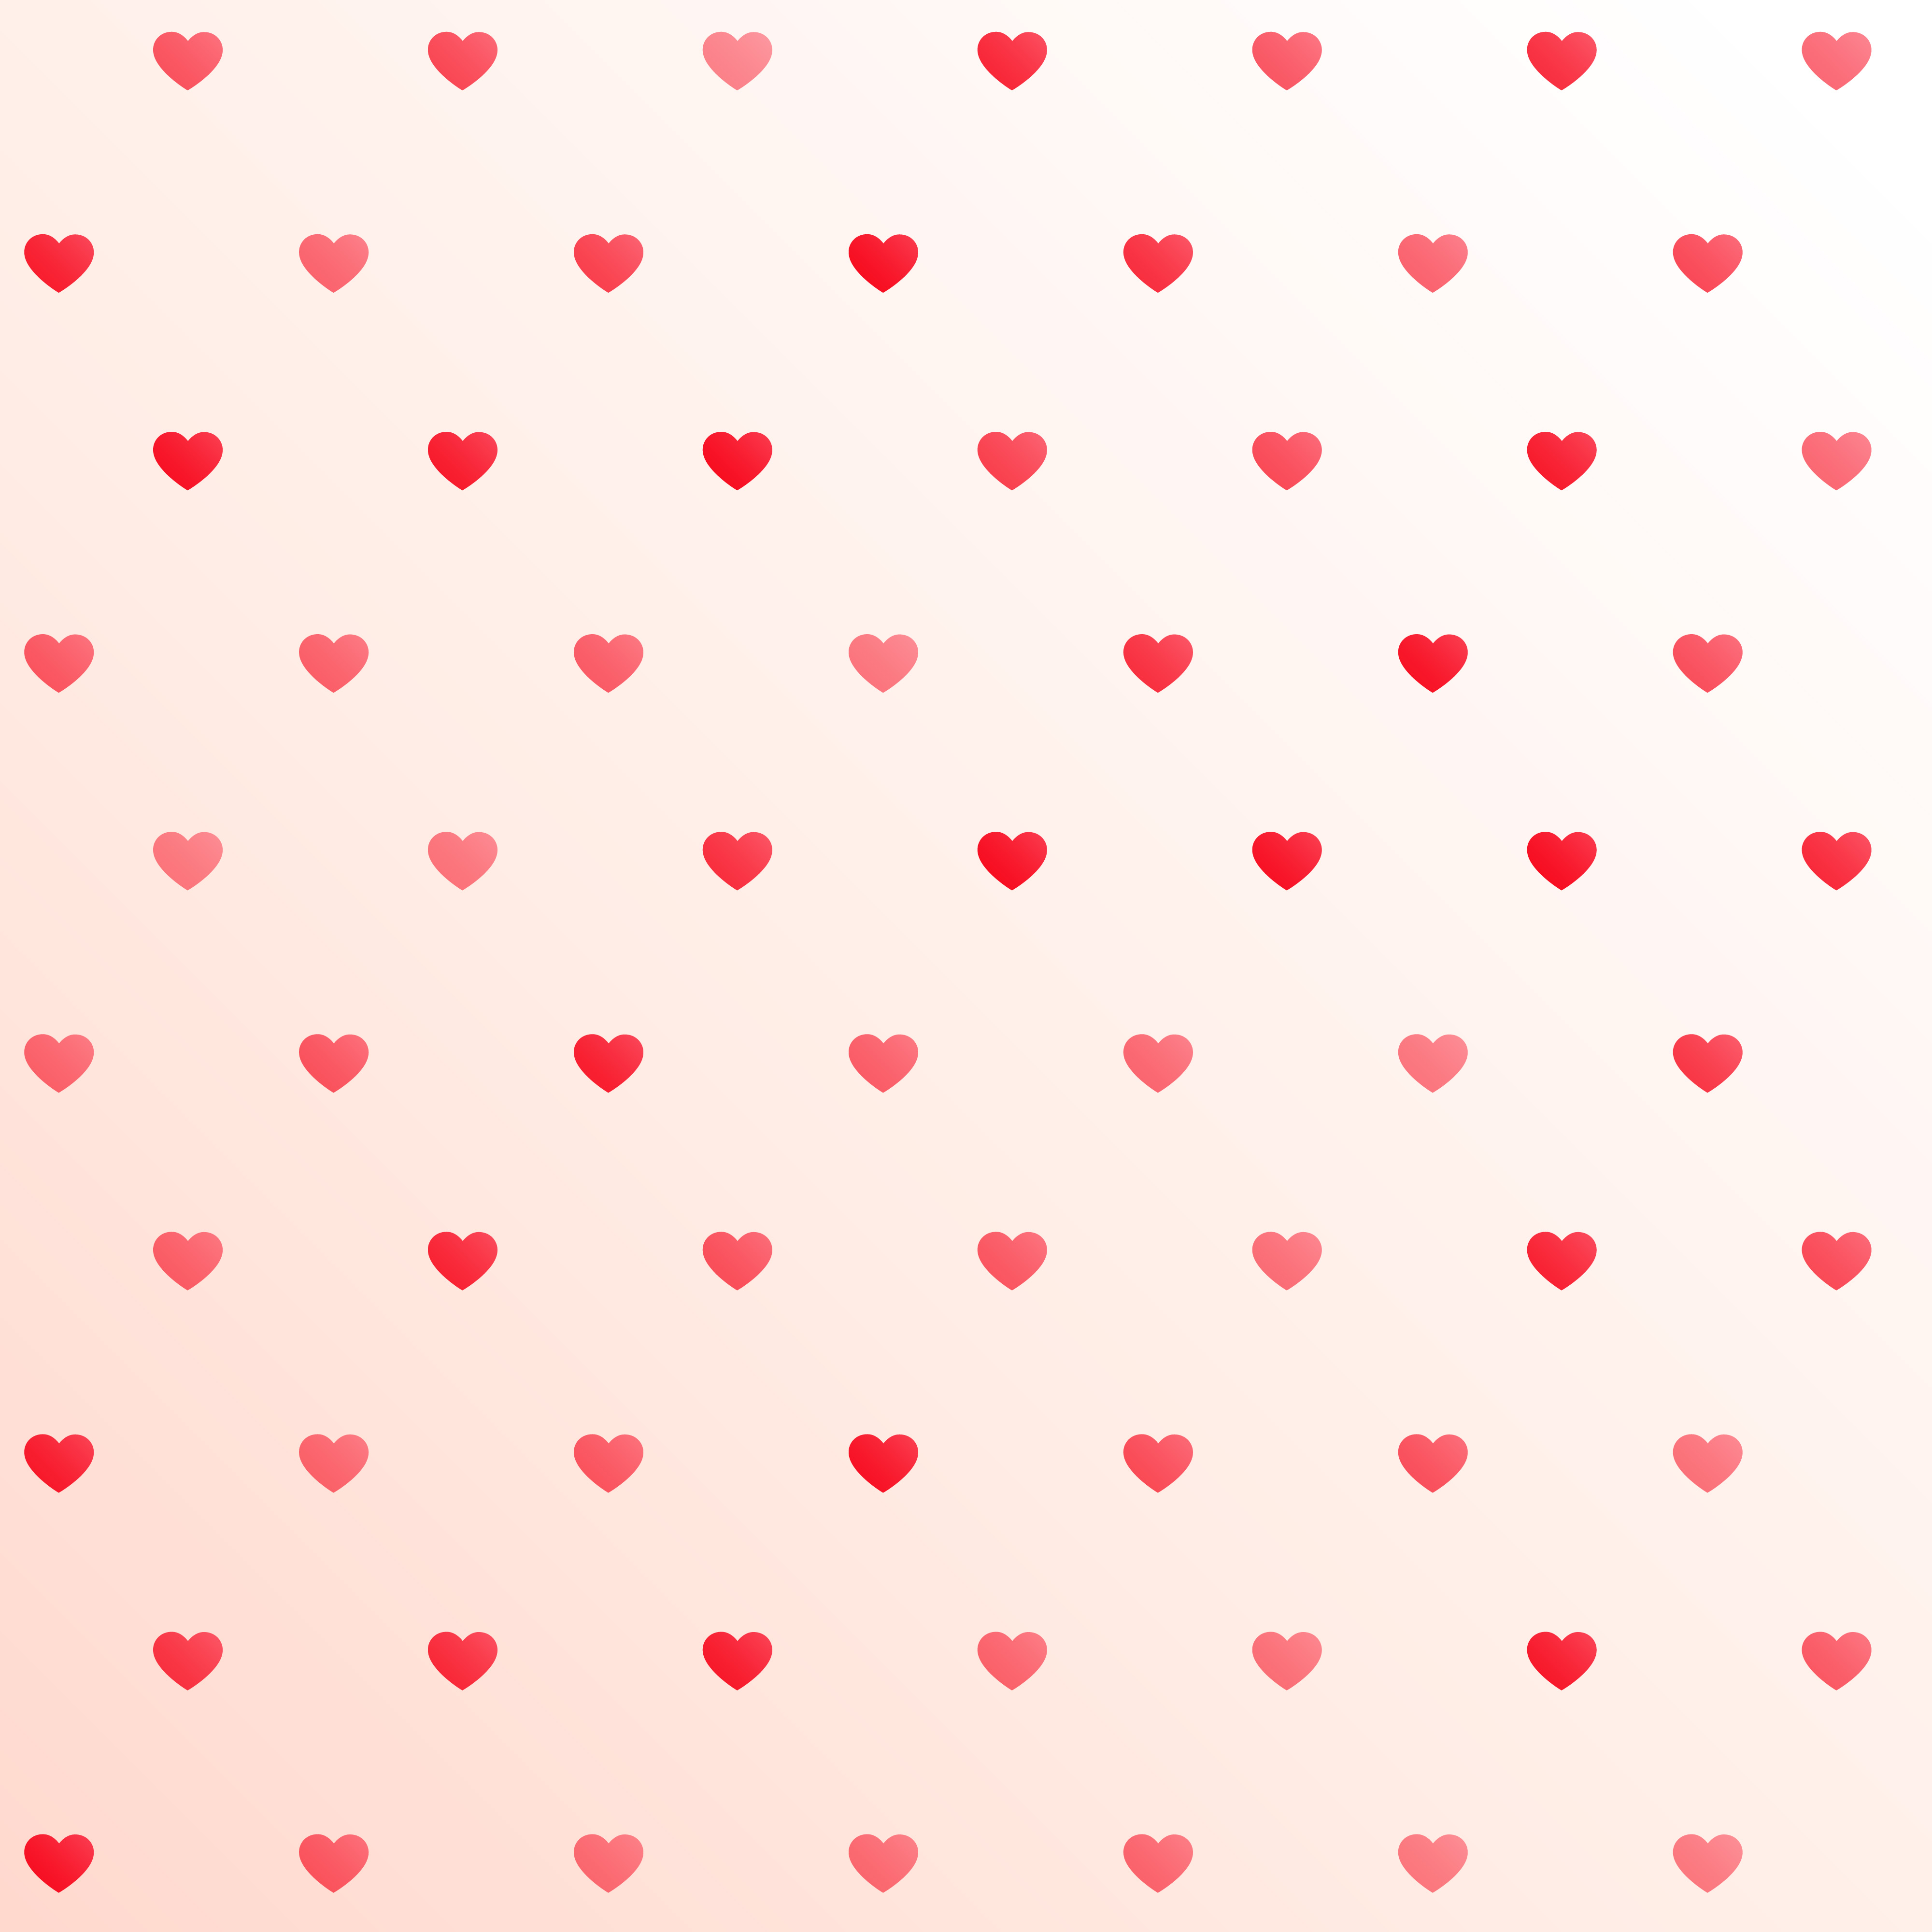 Awesome Hearts Pattern Background Design Download Free Vector Art